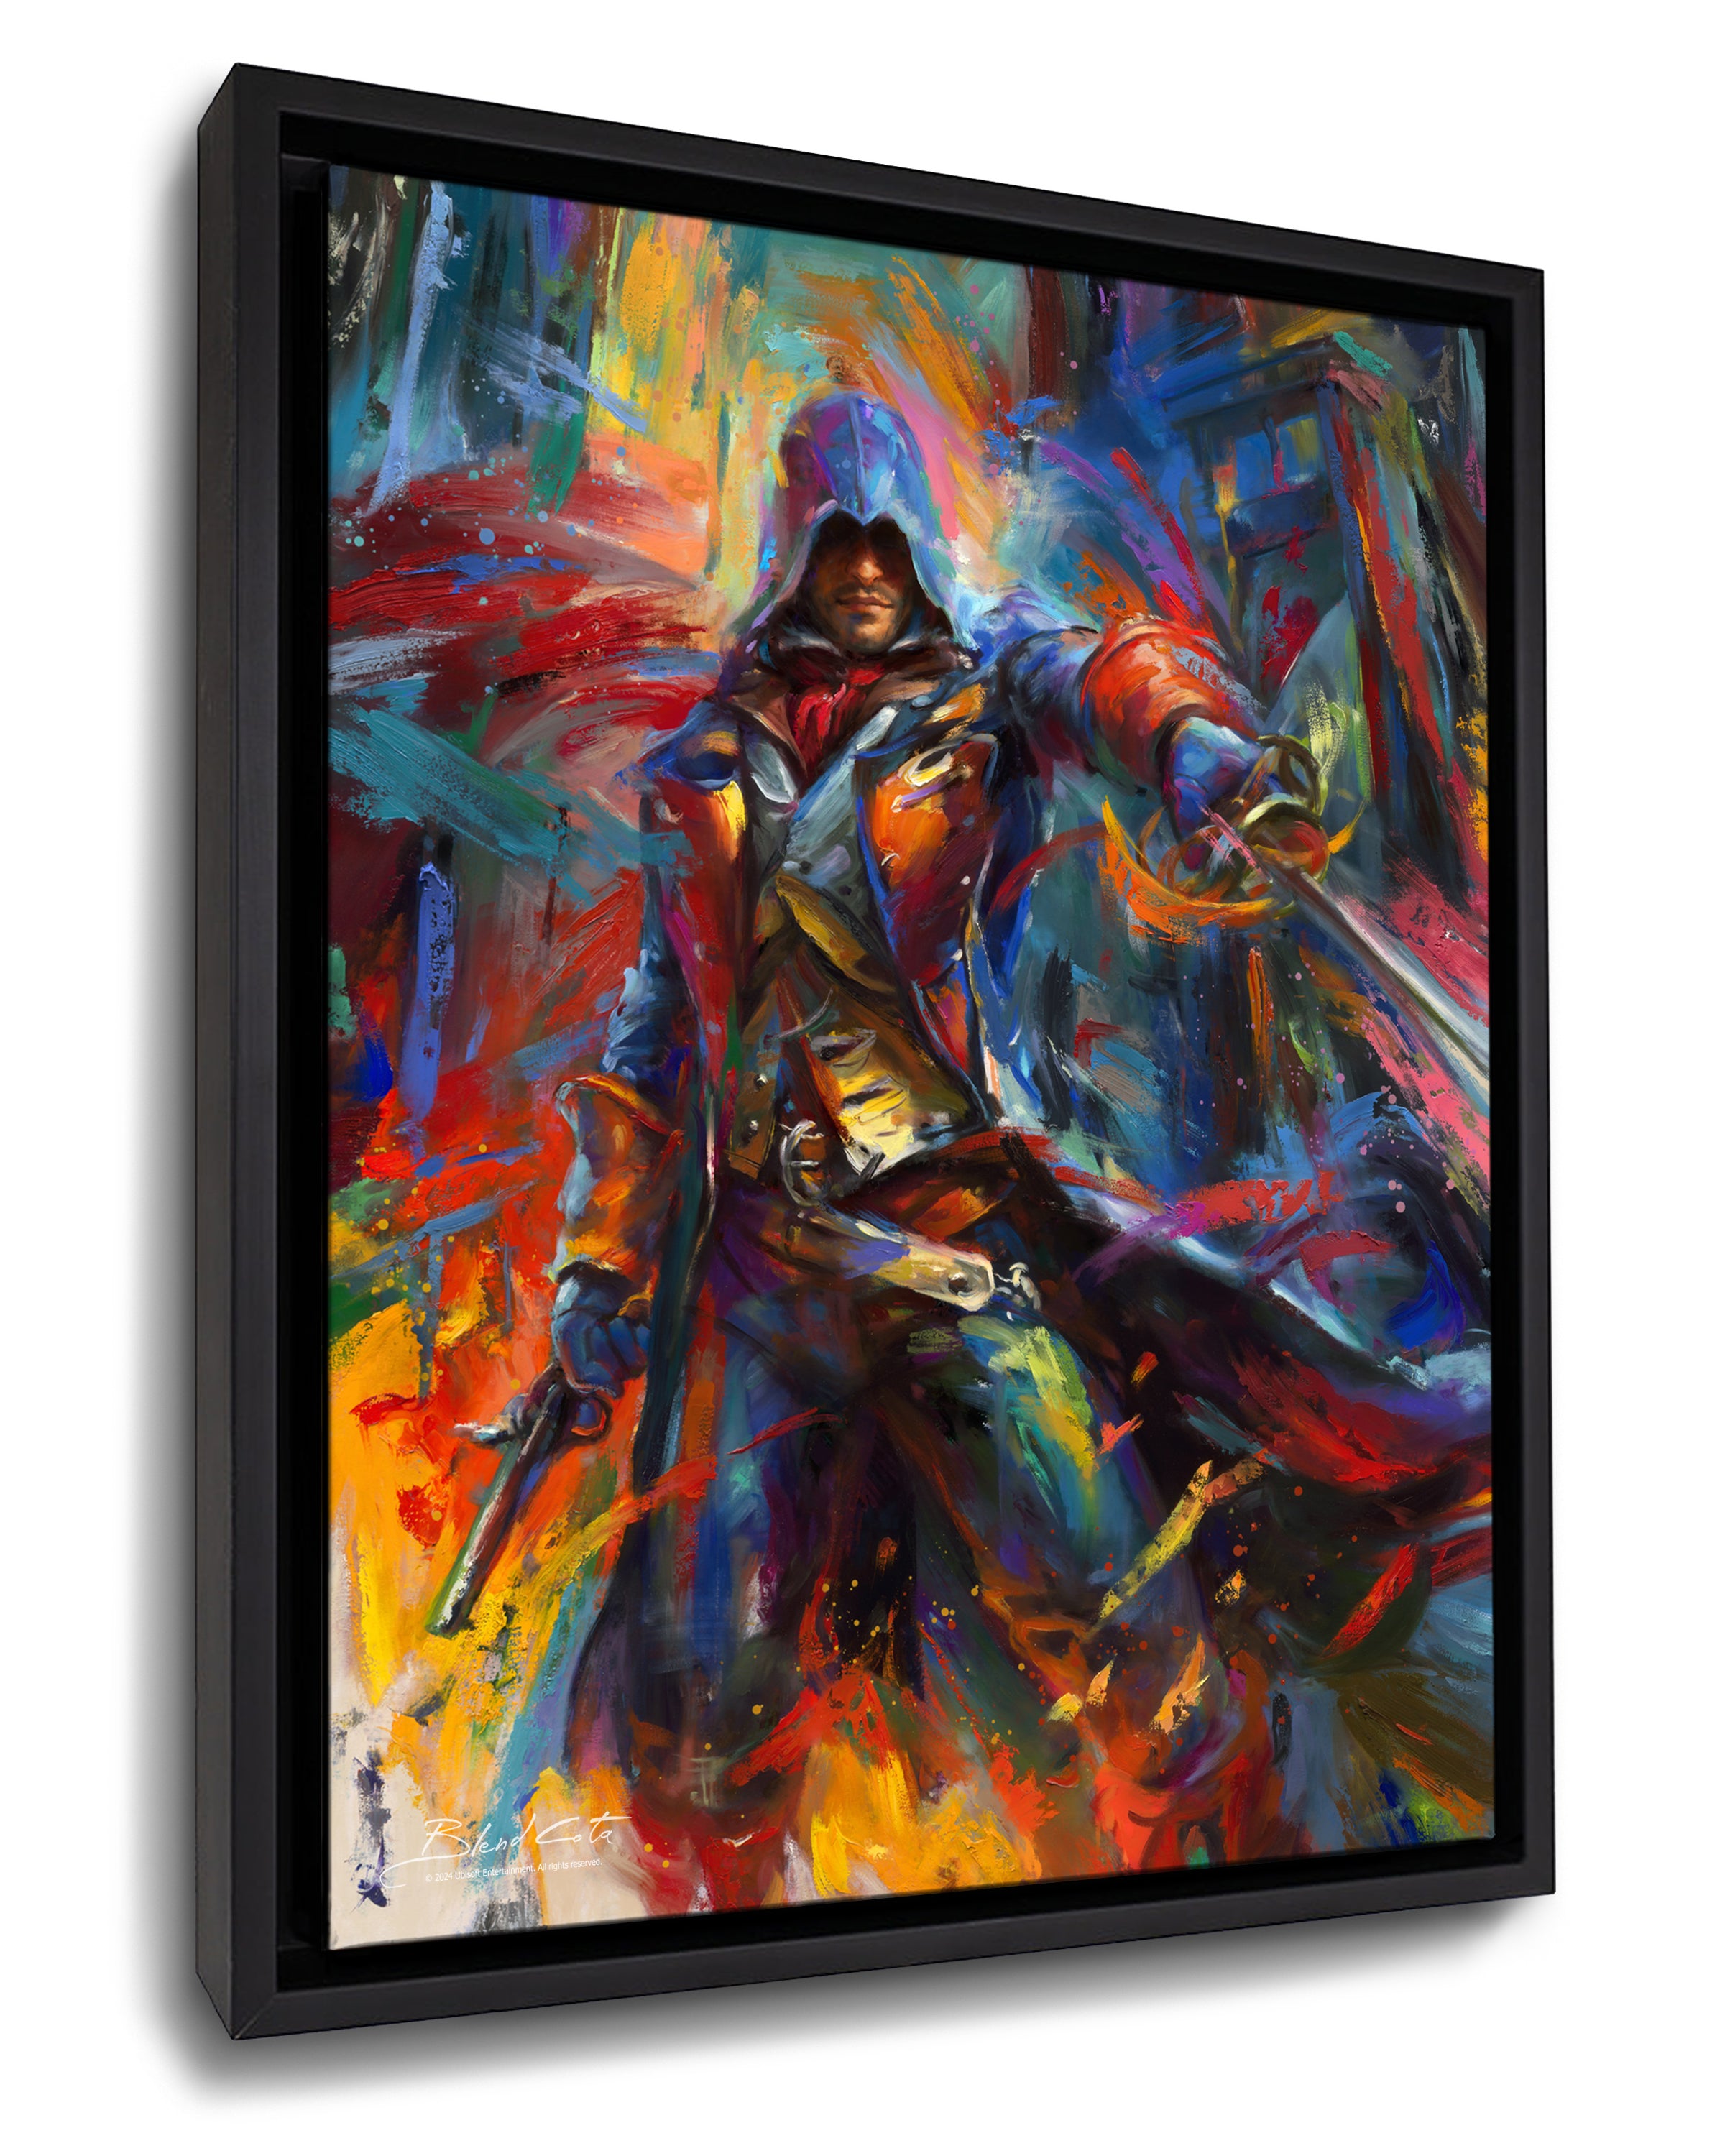 
                  
                    Framed canvas print of Assassin's Creed Arno Dorian of Unity bursting forth with energy and painted with colorful brushstrokes in an expressionistic style.
                  
                